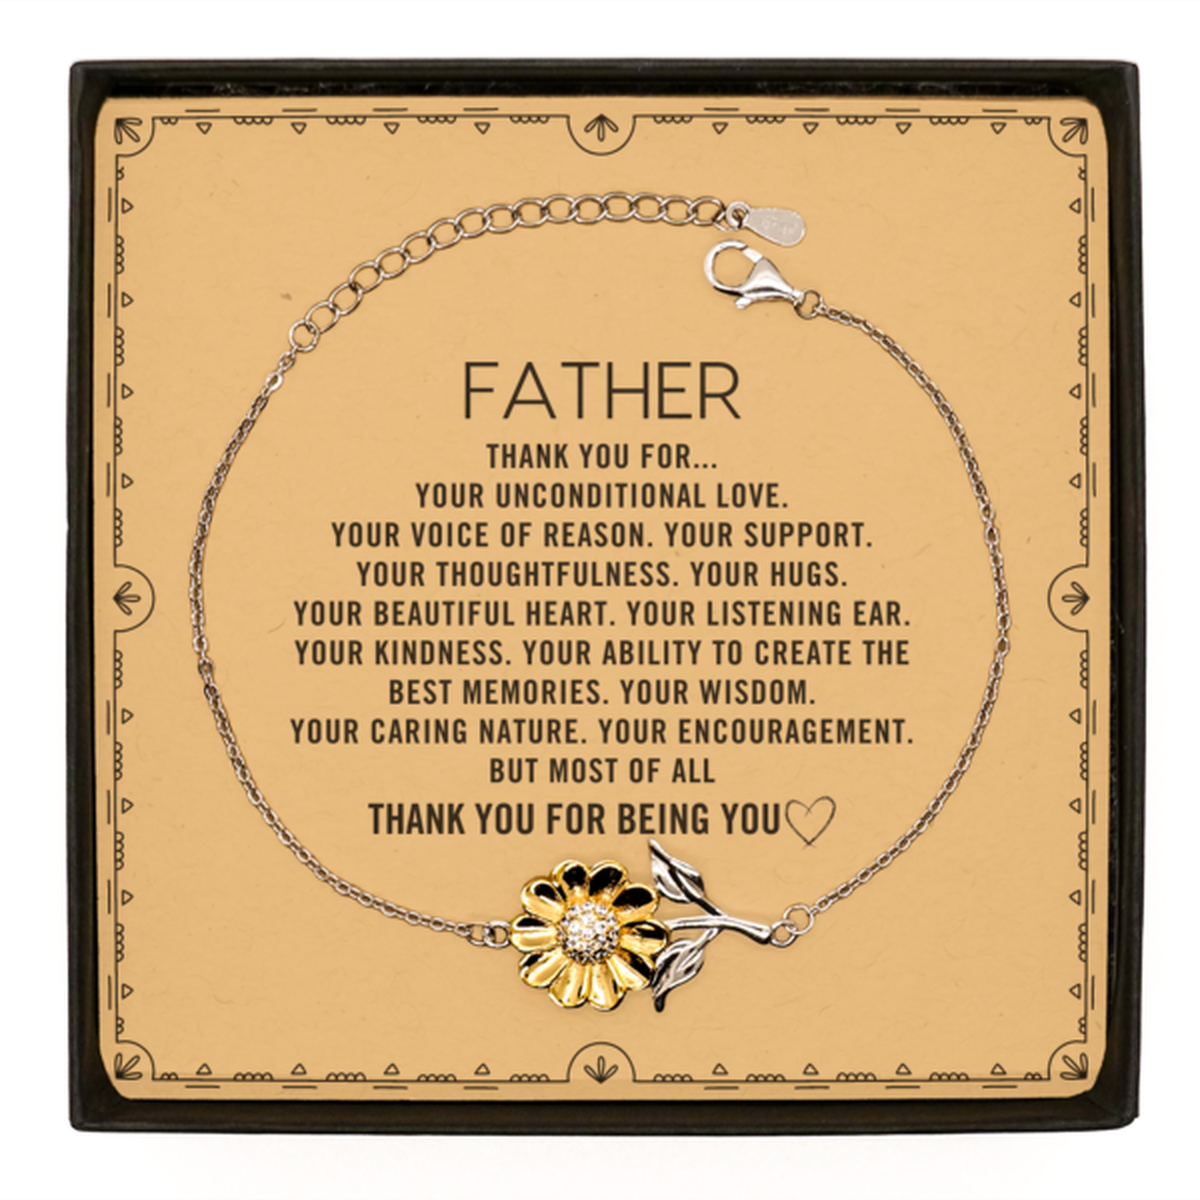 Father Sunflower Bracelet Custom, Message Card Gifts For Father Christmas Graduation Birthday Gifts for Men Women Father Thank you for Your unconditional love